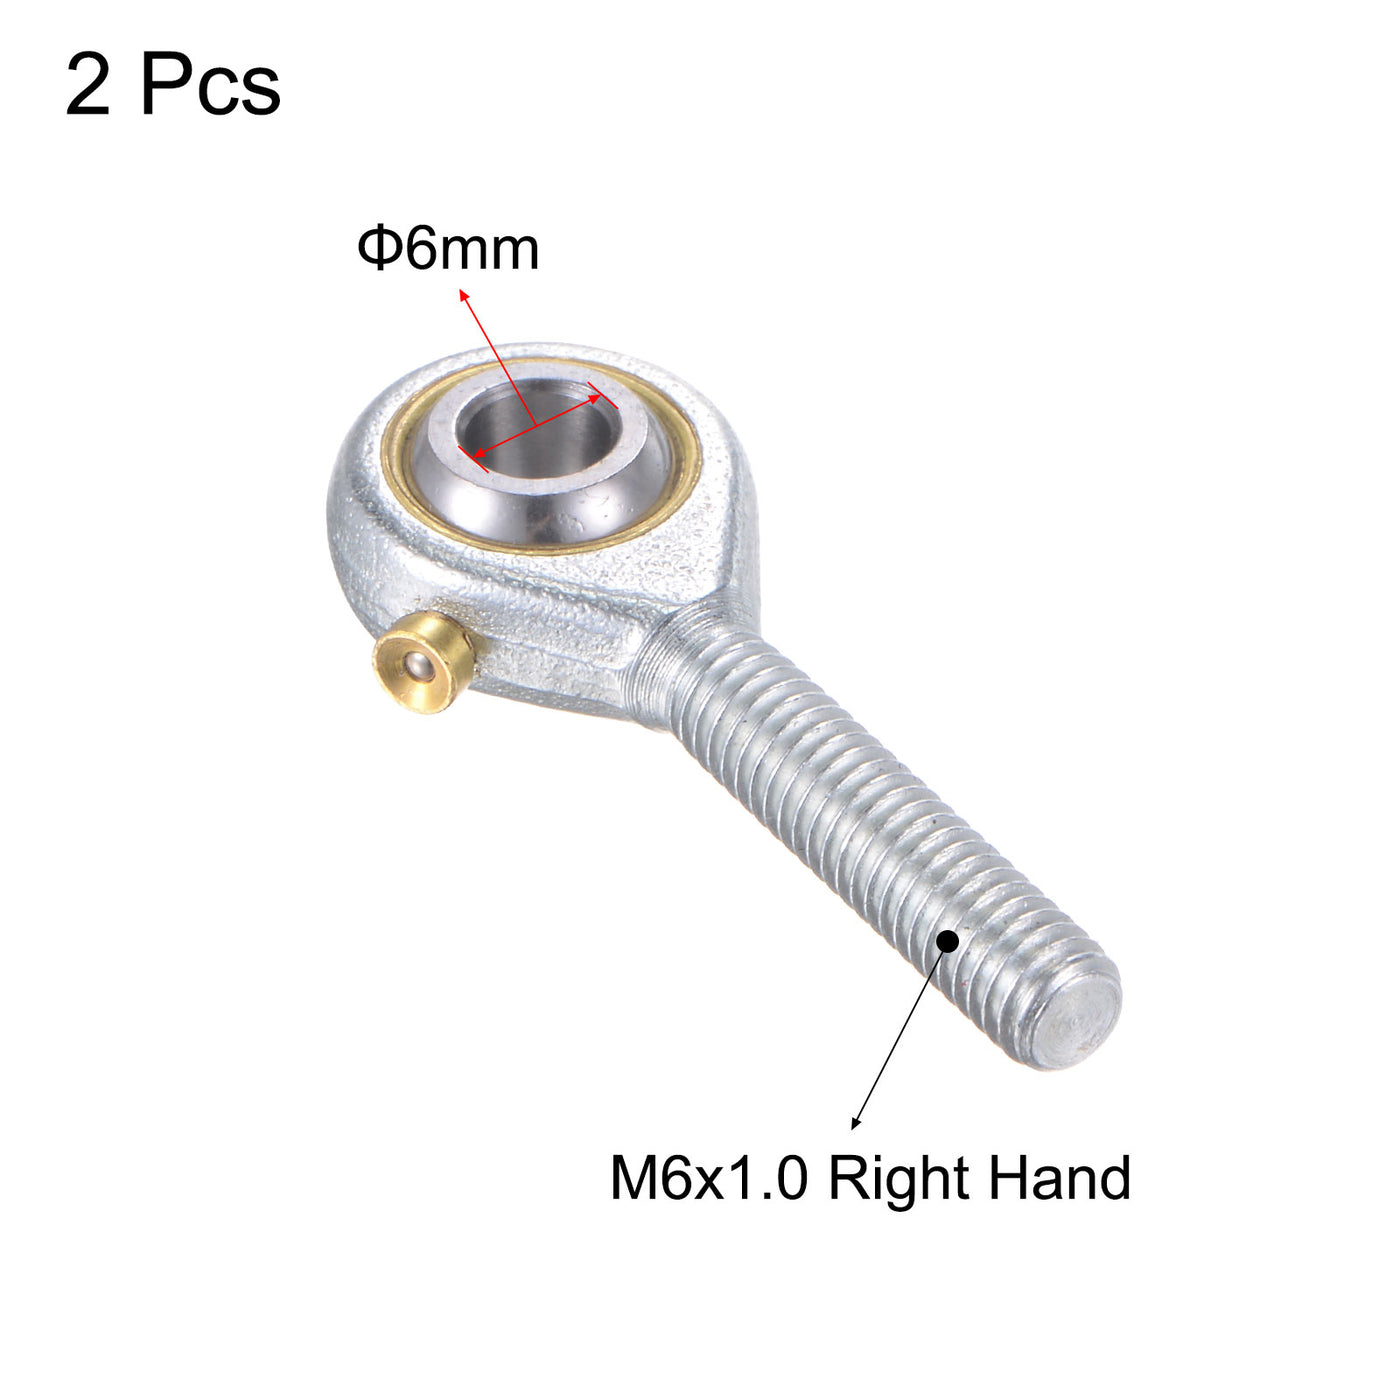 uxcell Uxcell 2pcs POS6 Rod End Bearing 6mm Bore Self-lubricated M6x1.0 Right Hand Male Thread